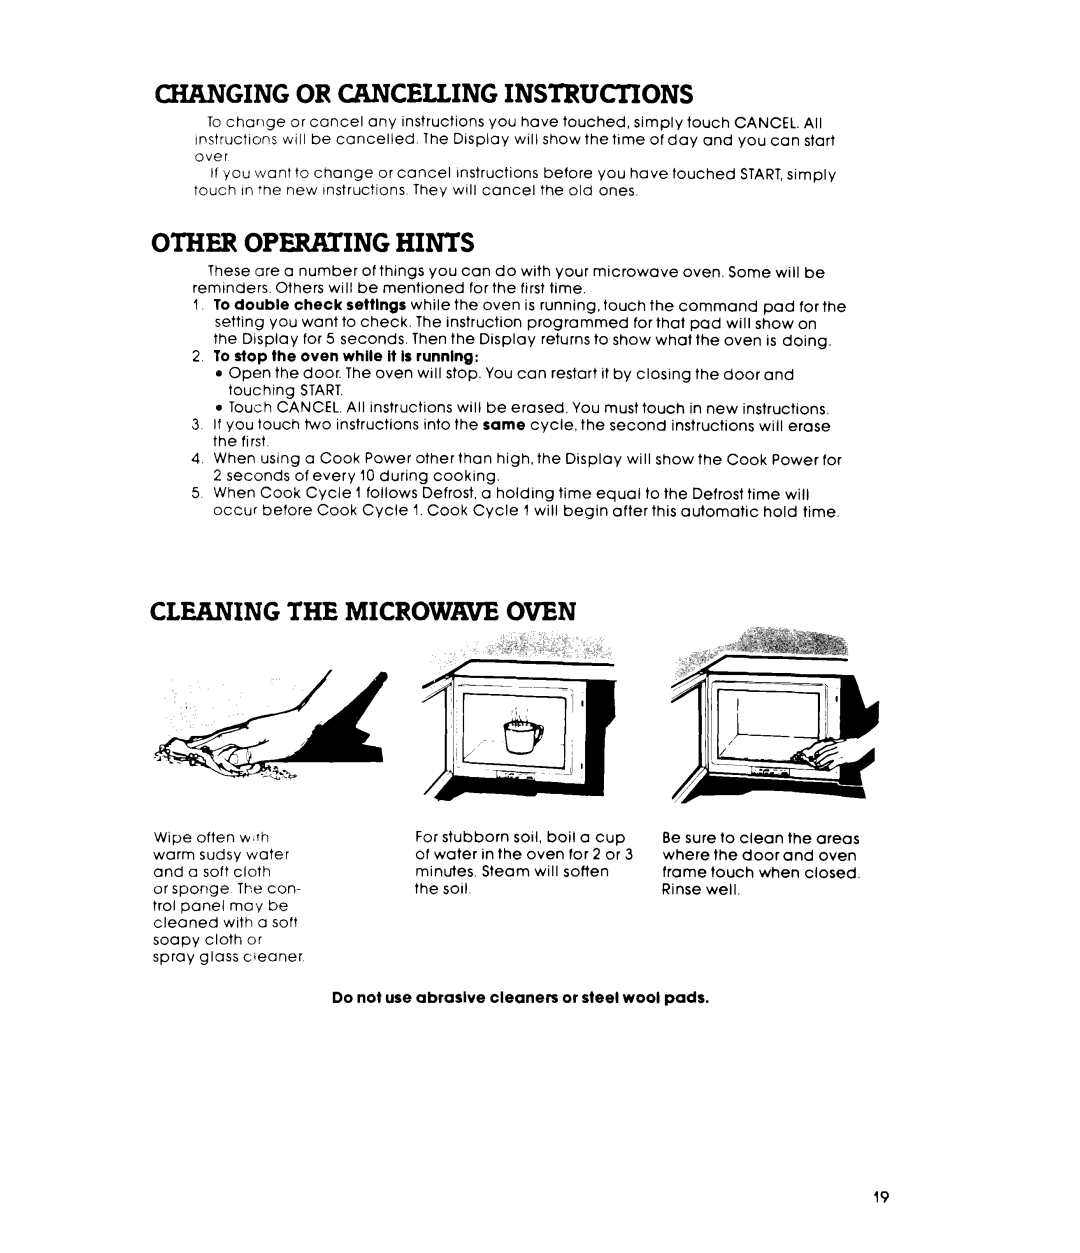 Whirlpool RM988PXL warranty Changing Or Cancelling Instructions, Other Operating Hints, Cleaning The Microwkve Oven 